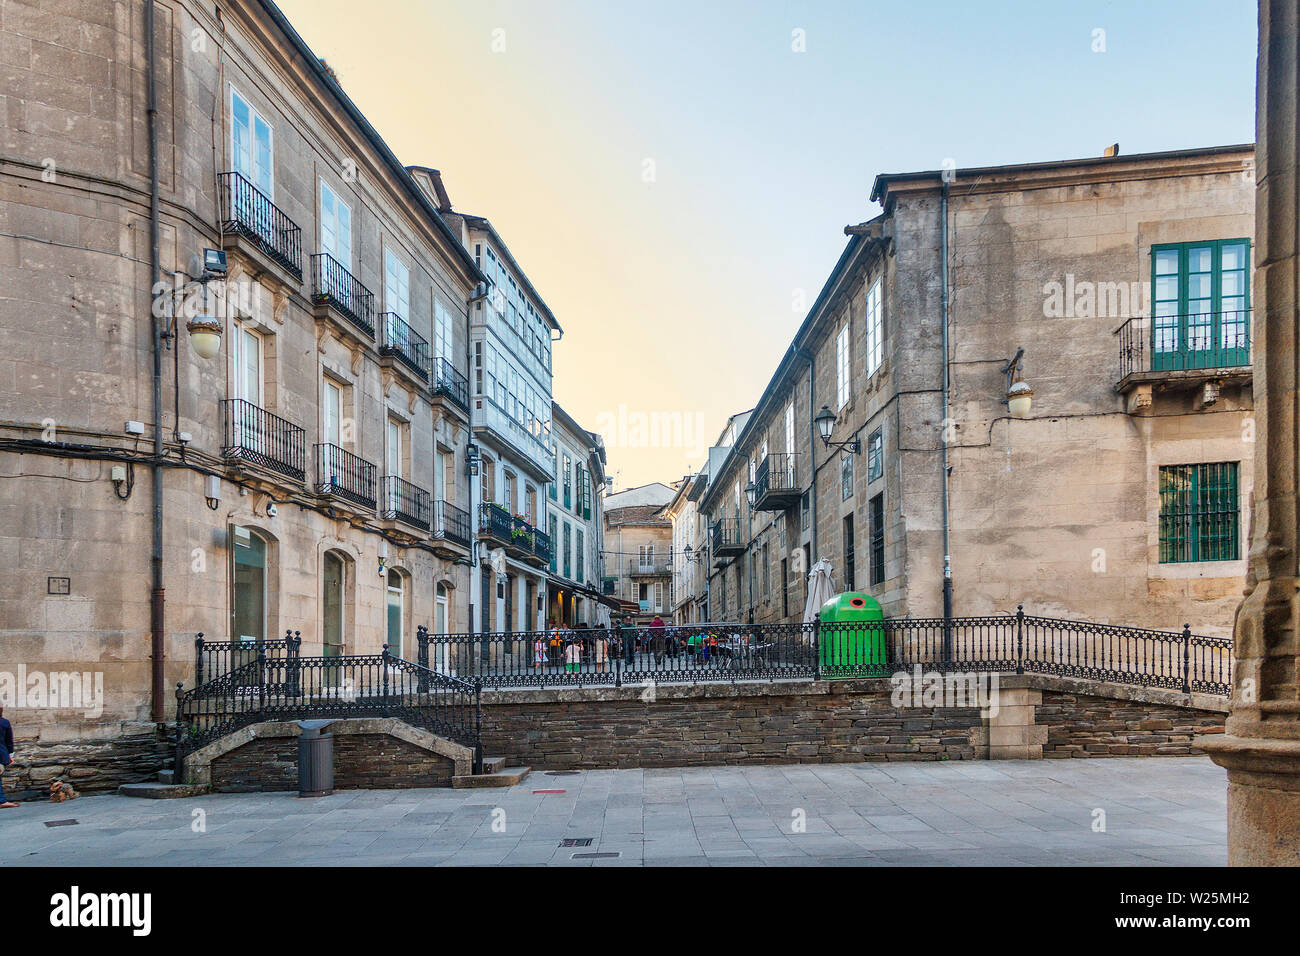 Basulto bishop street in the historical an monumental center of Lugo city Stock Photo